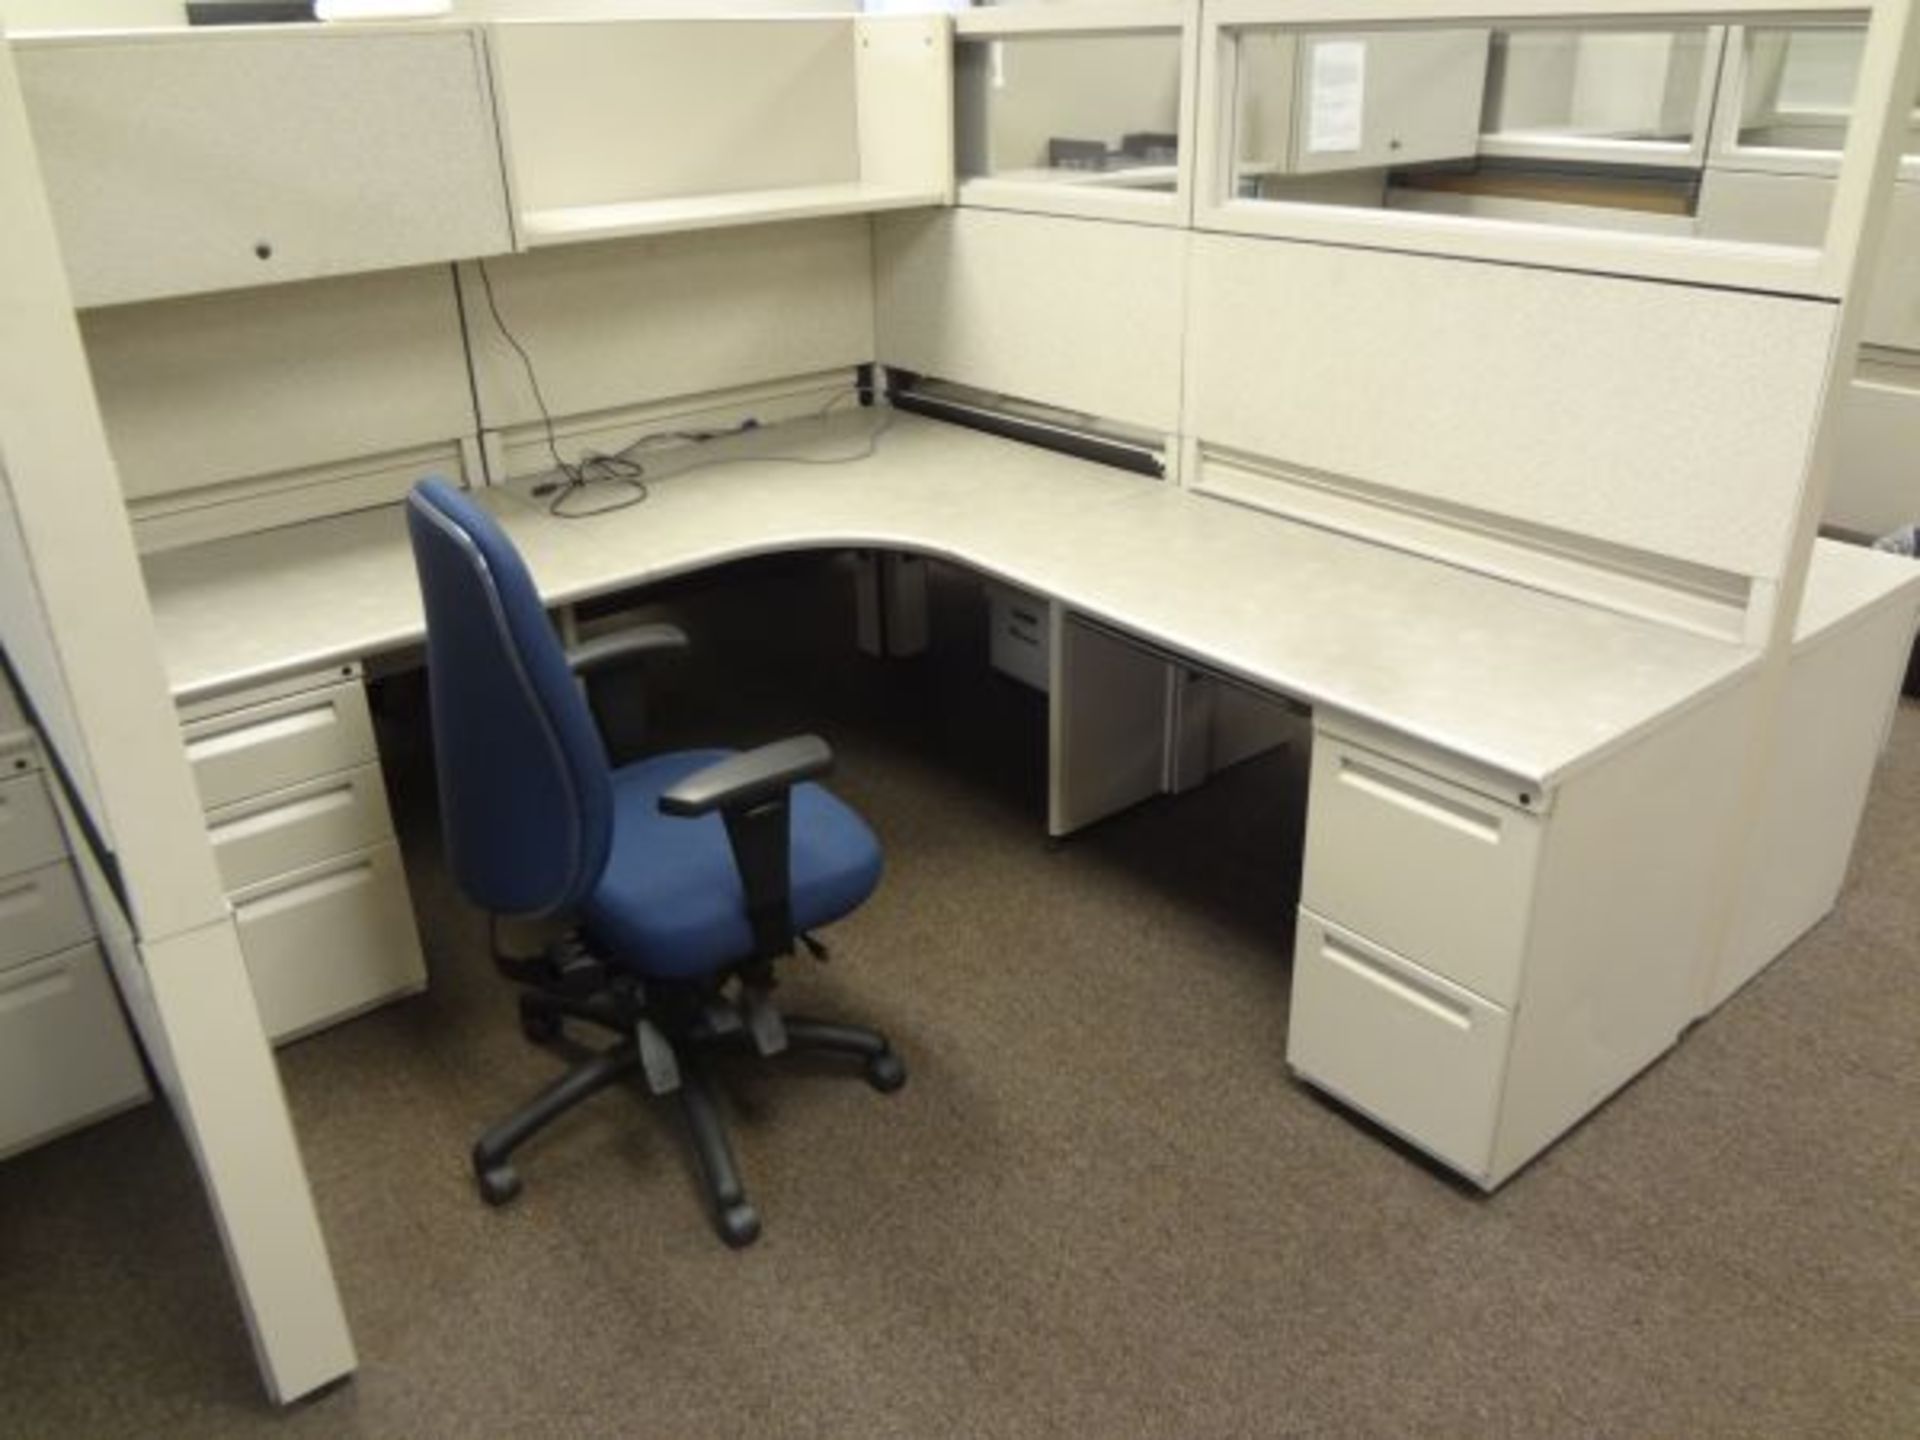 (LOT) 88" X 86" X 65" SIX-PERSON MARVELL MODULAR OFFICE INCLUDING (1) OVERHEAD CABINET, (1) OVERHEAD - Image 2 of 6